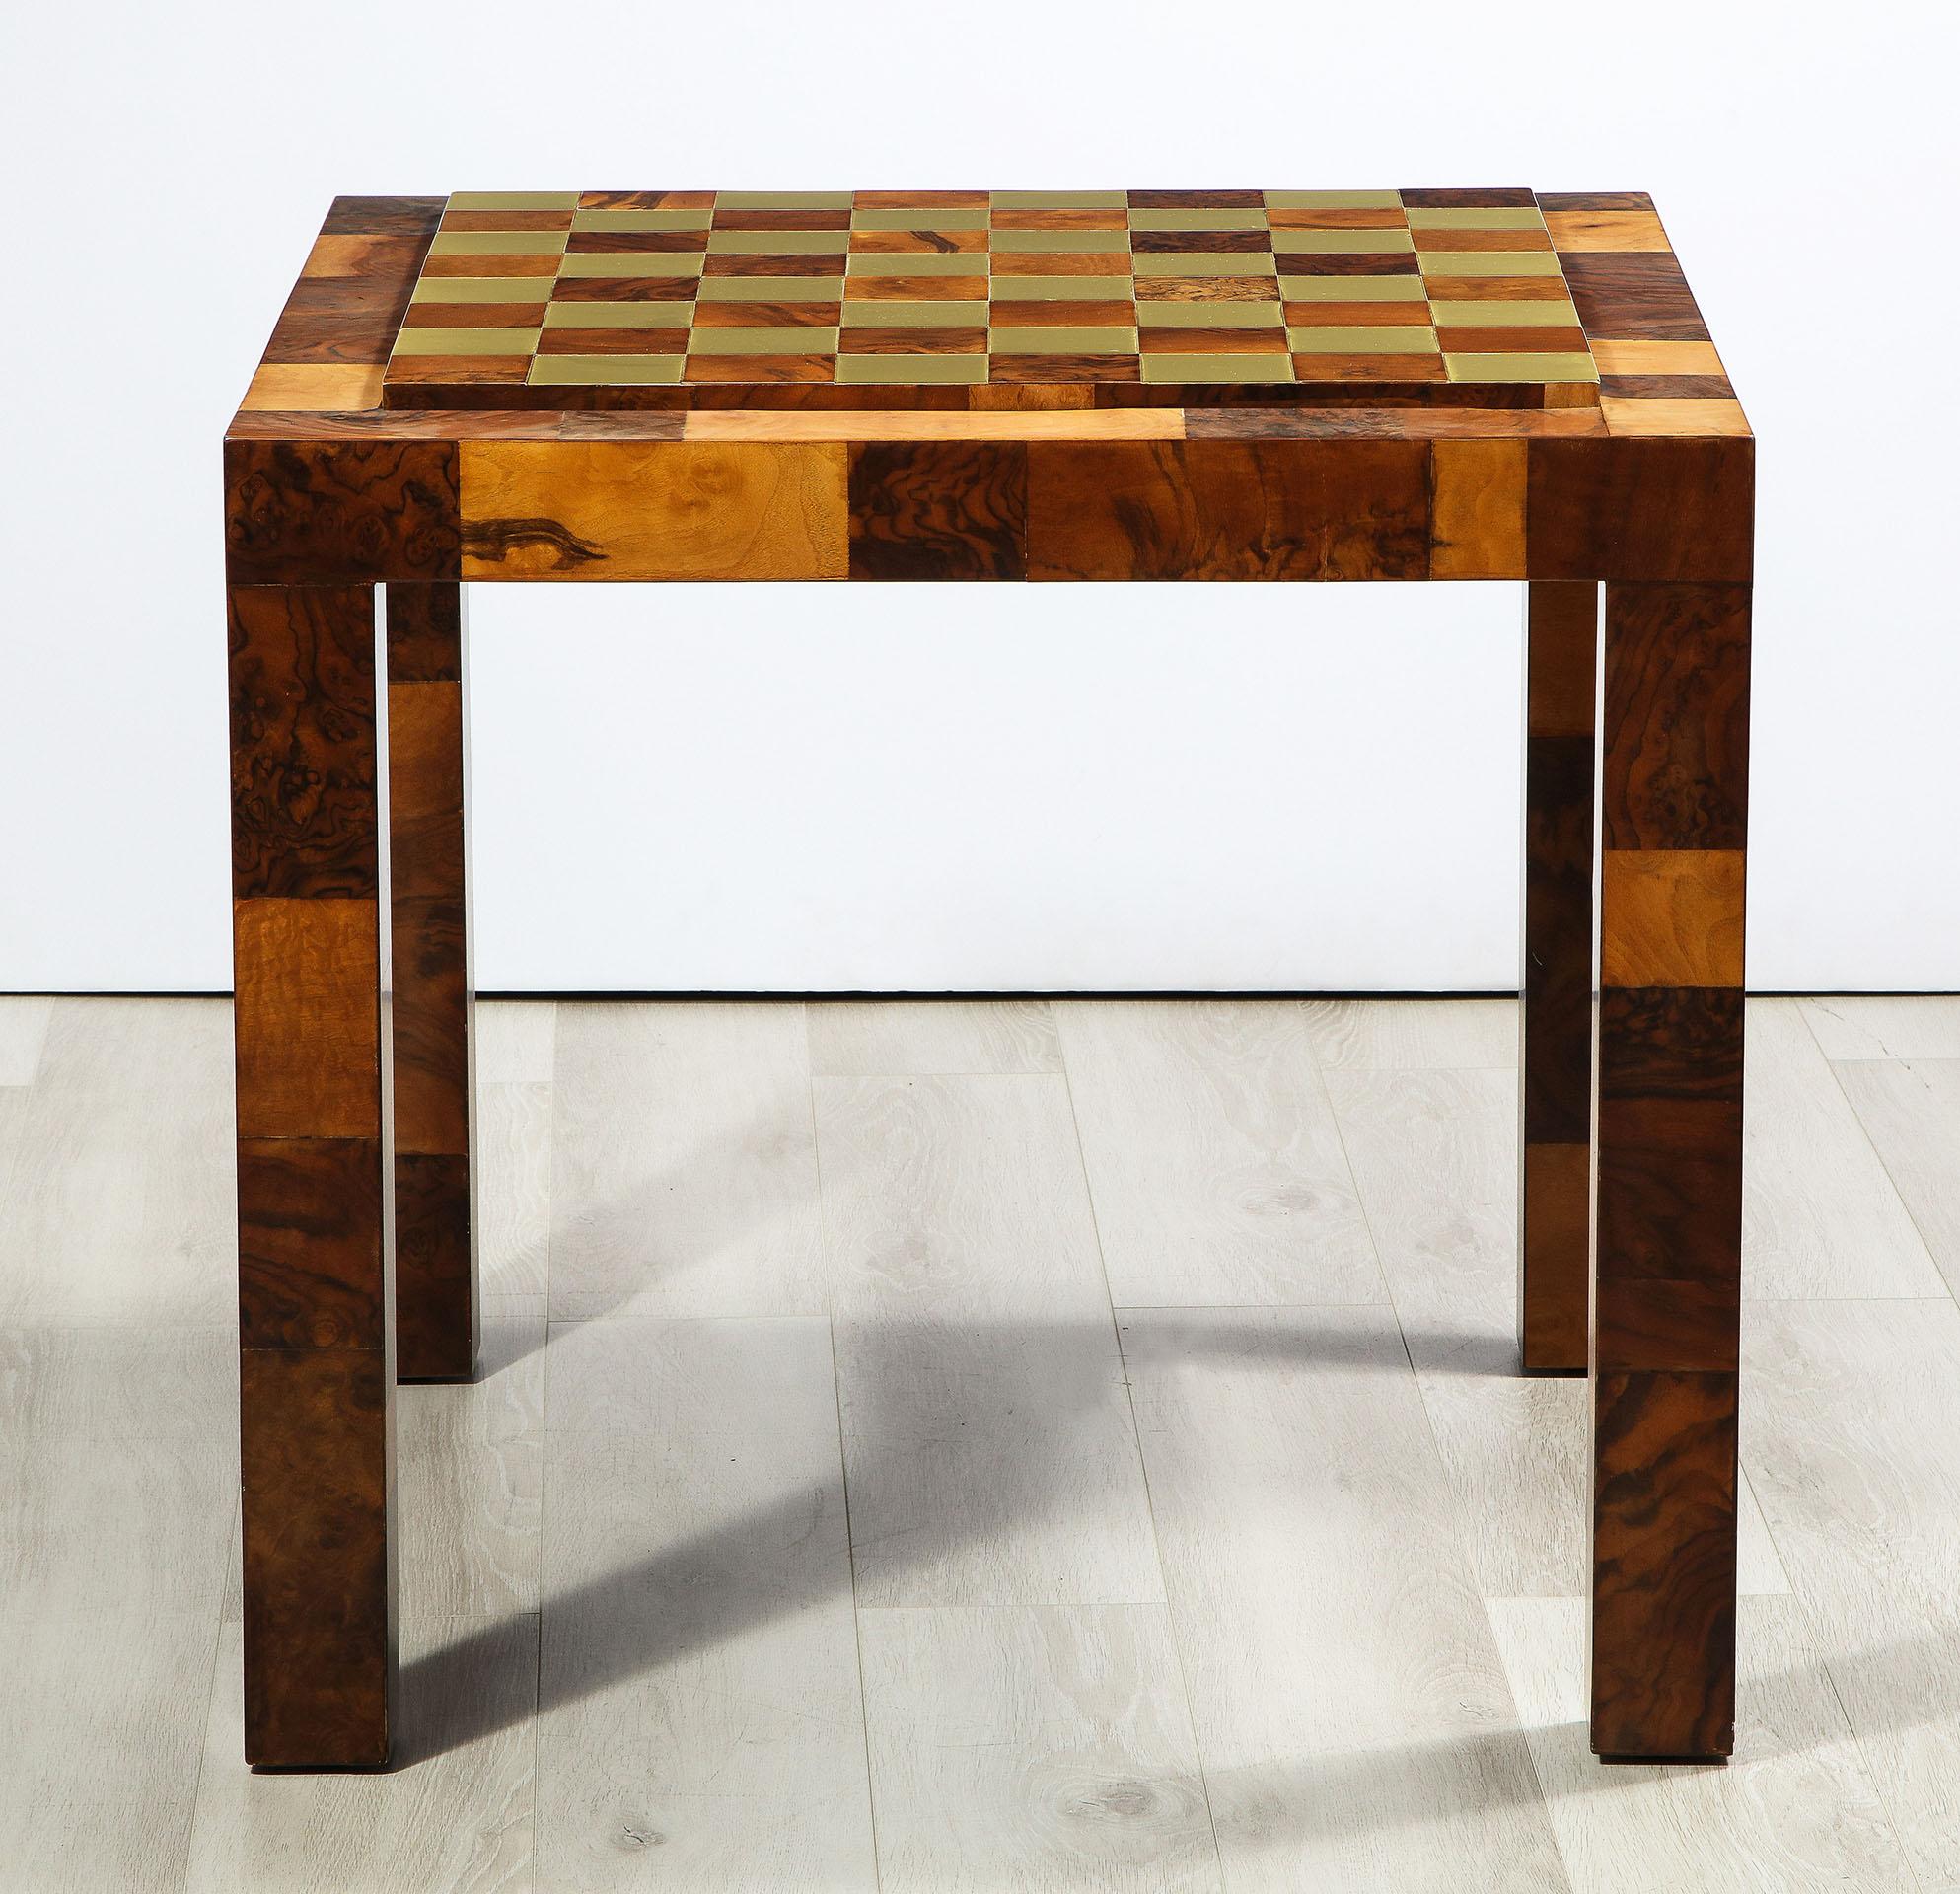 The game table by Paul Evans, having a burl wood frame supporting a top which reverses from a polished brass and burl board to a black laminate top or it can be removed to use the felt base underneath.